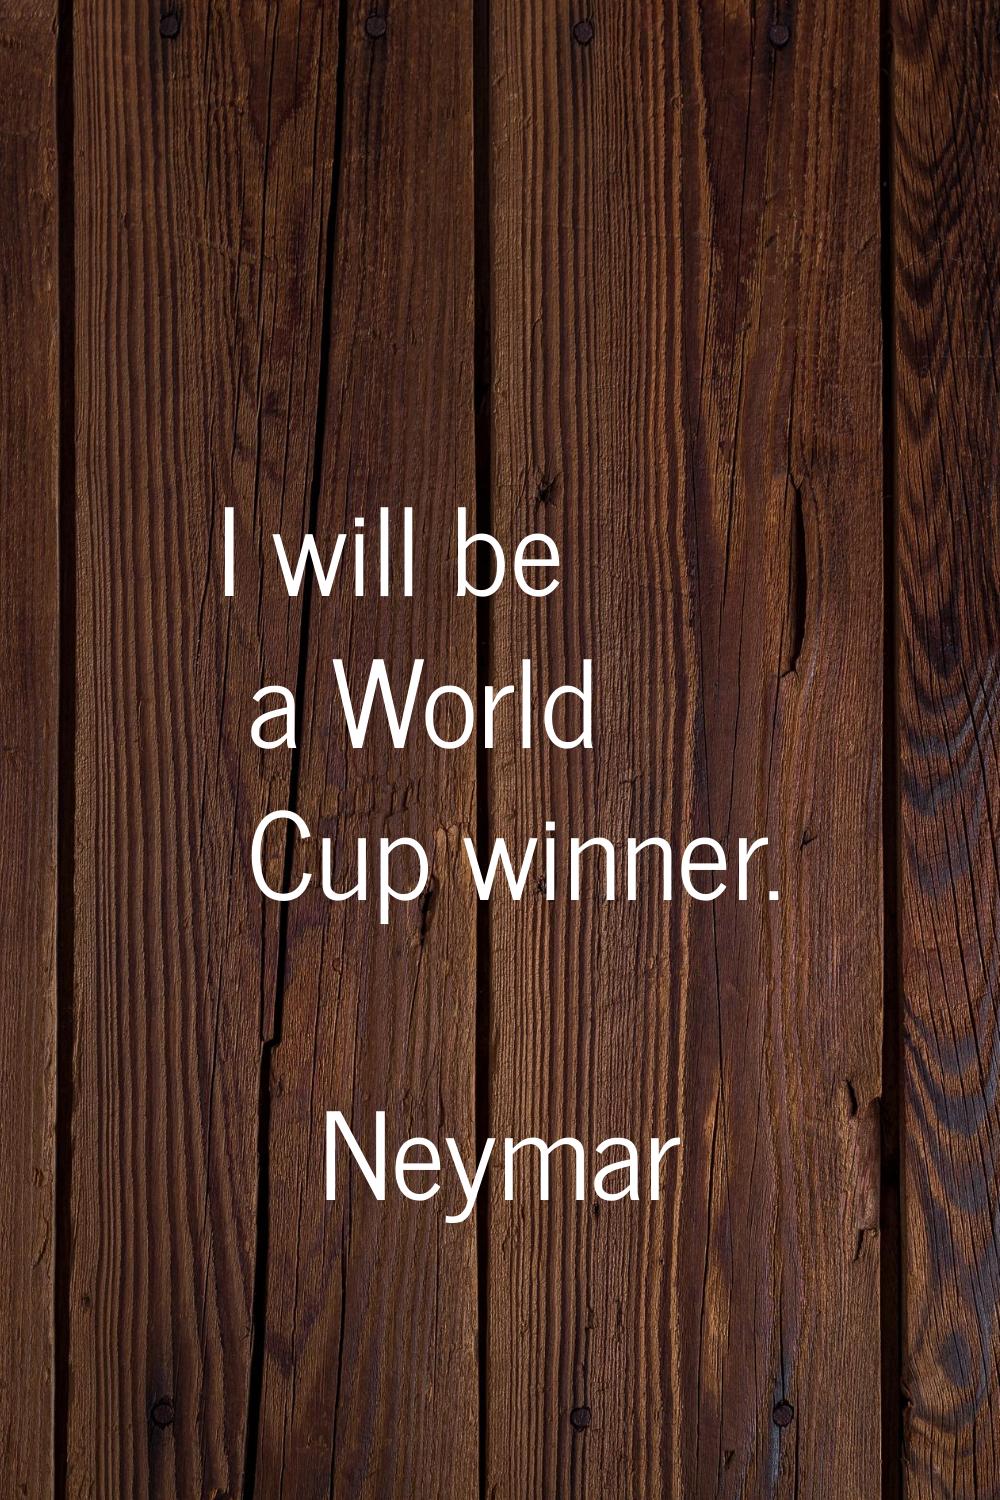 I will be a World Cup winner.